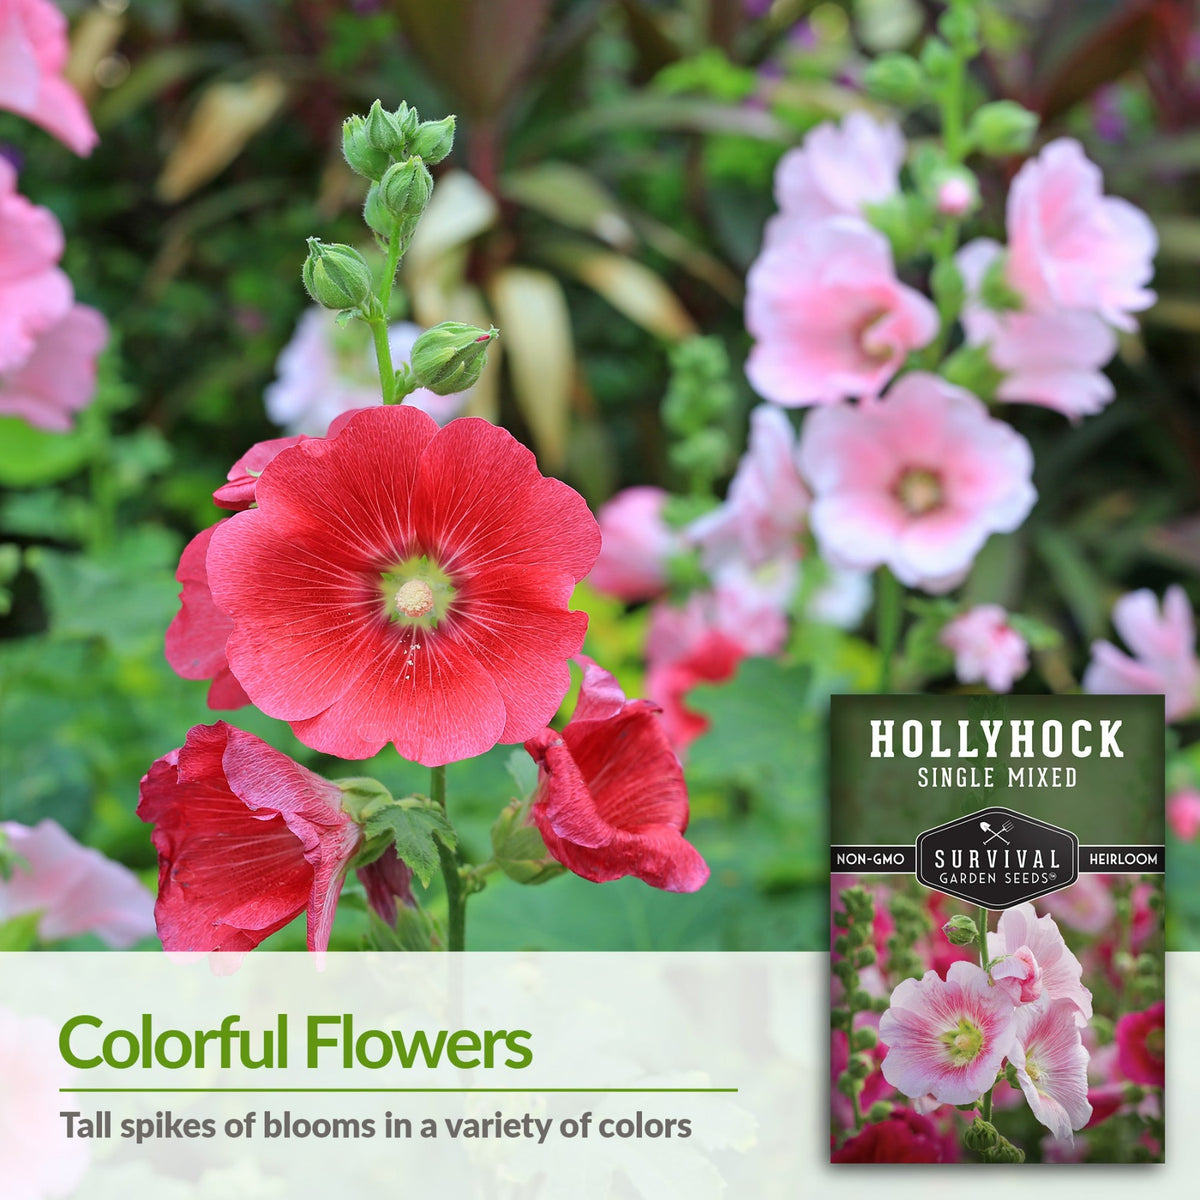 Hollyhocks produce tall spikes of blooms in a variety of colors